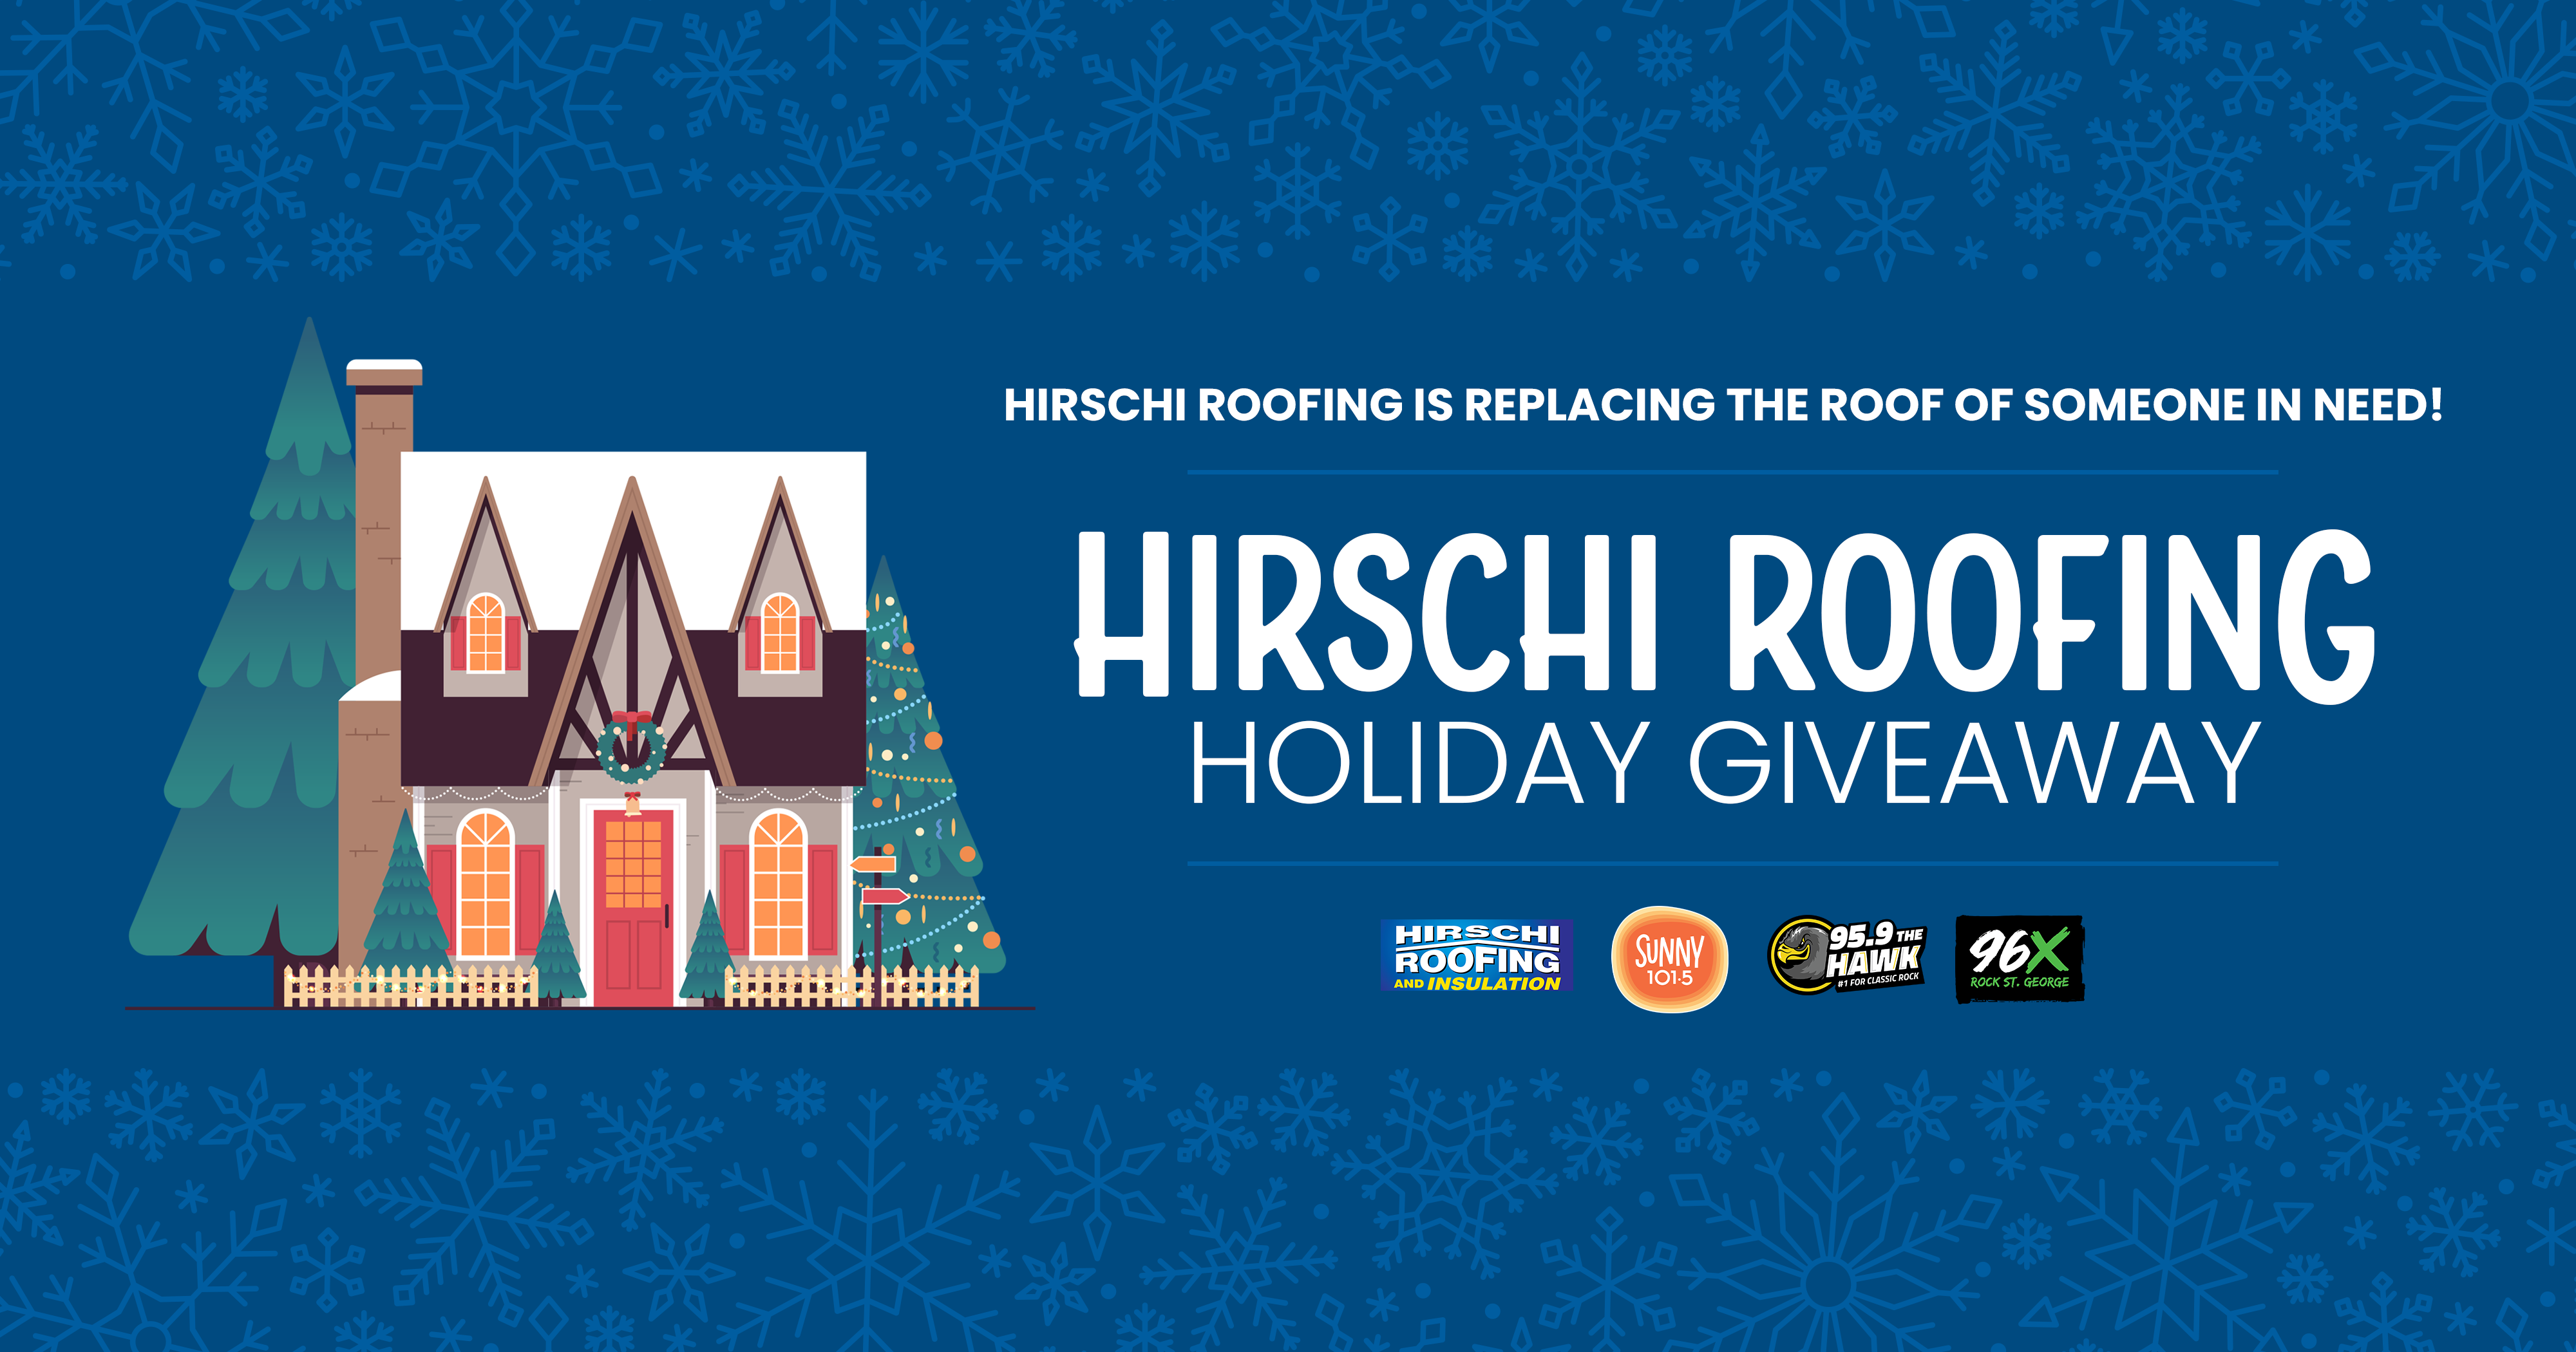 Hirschi Roofing Holiday Giveaway